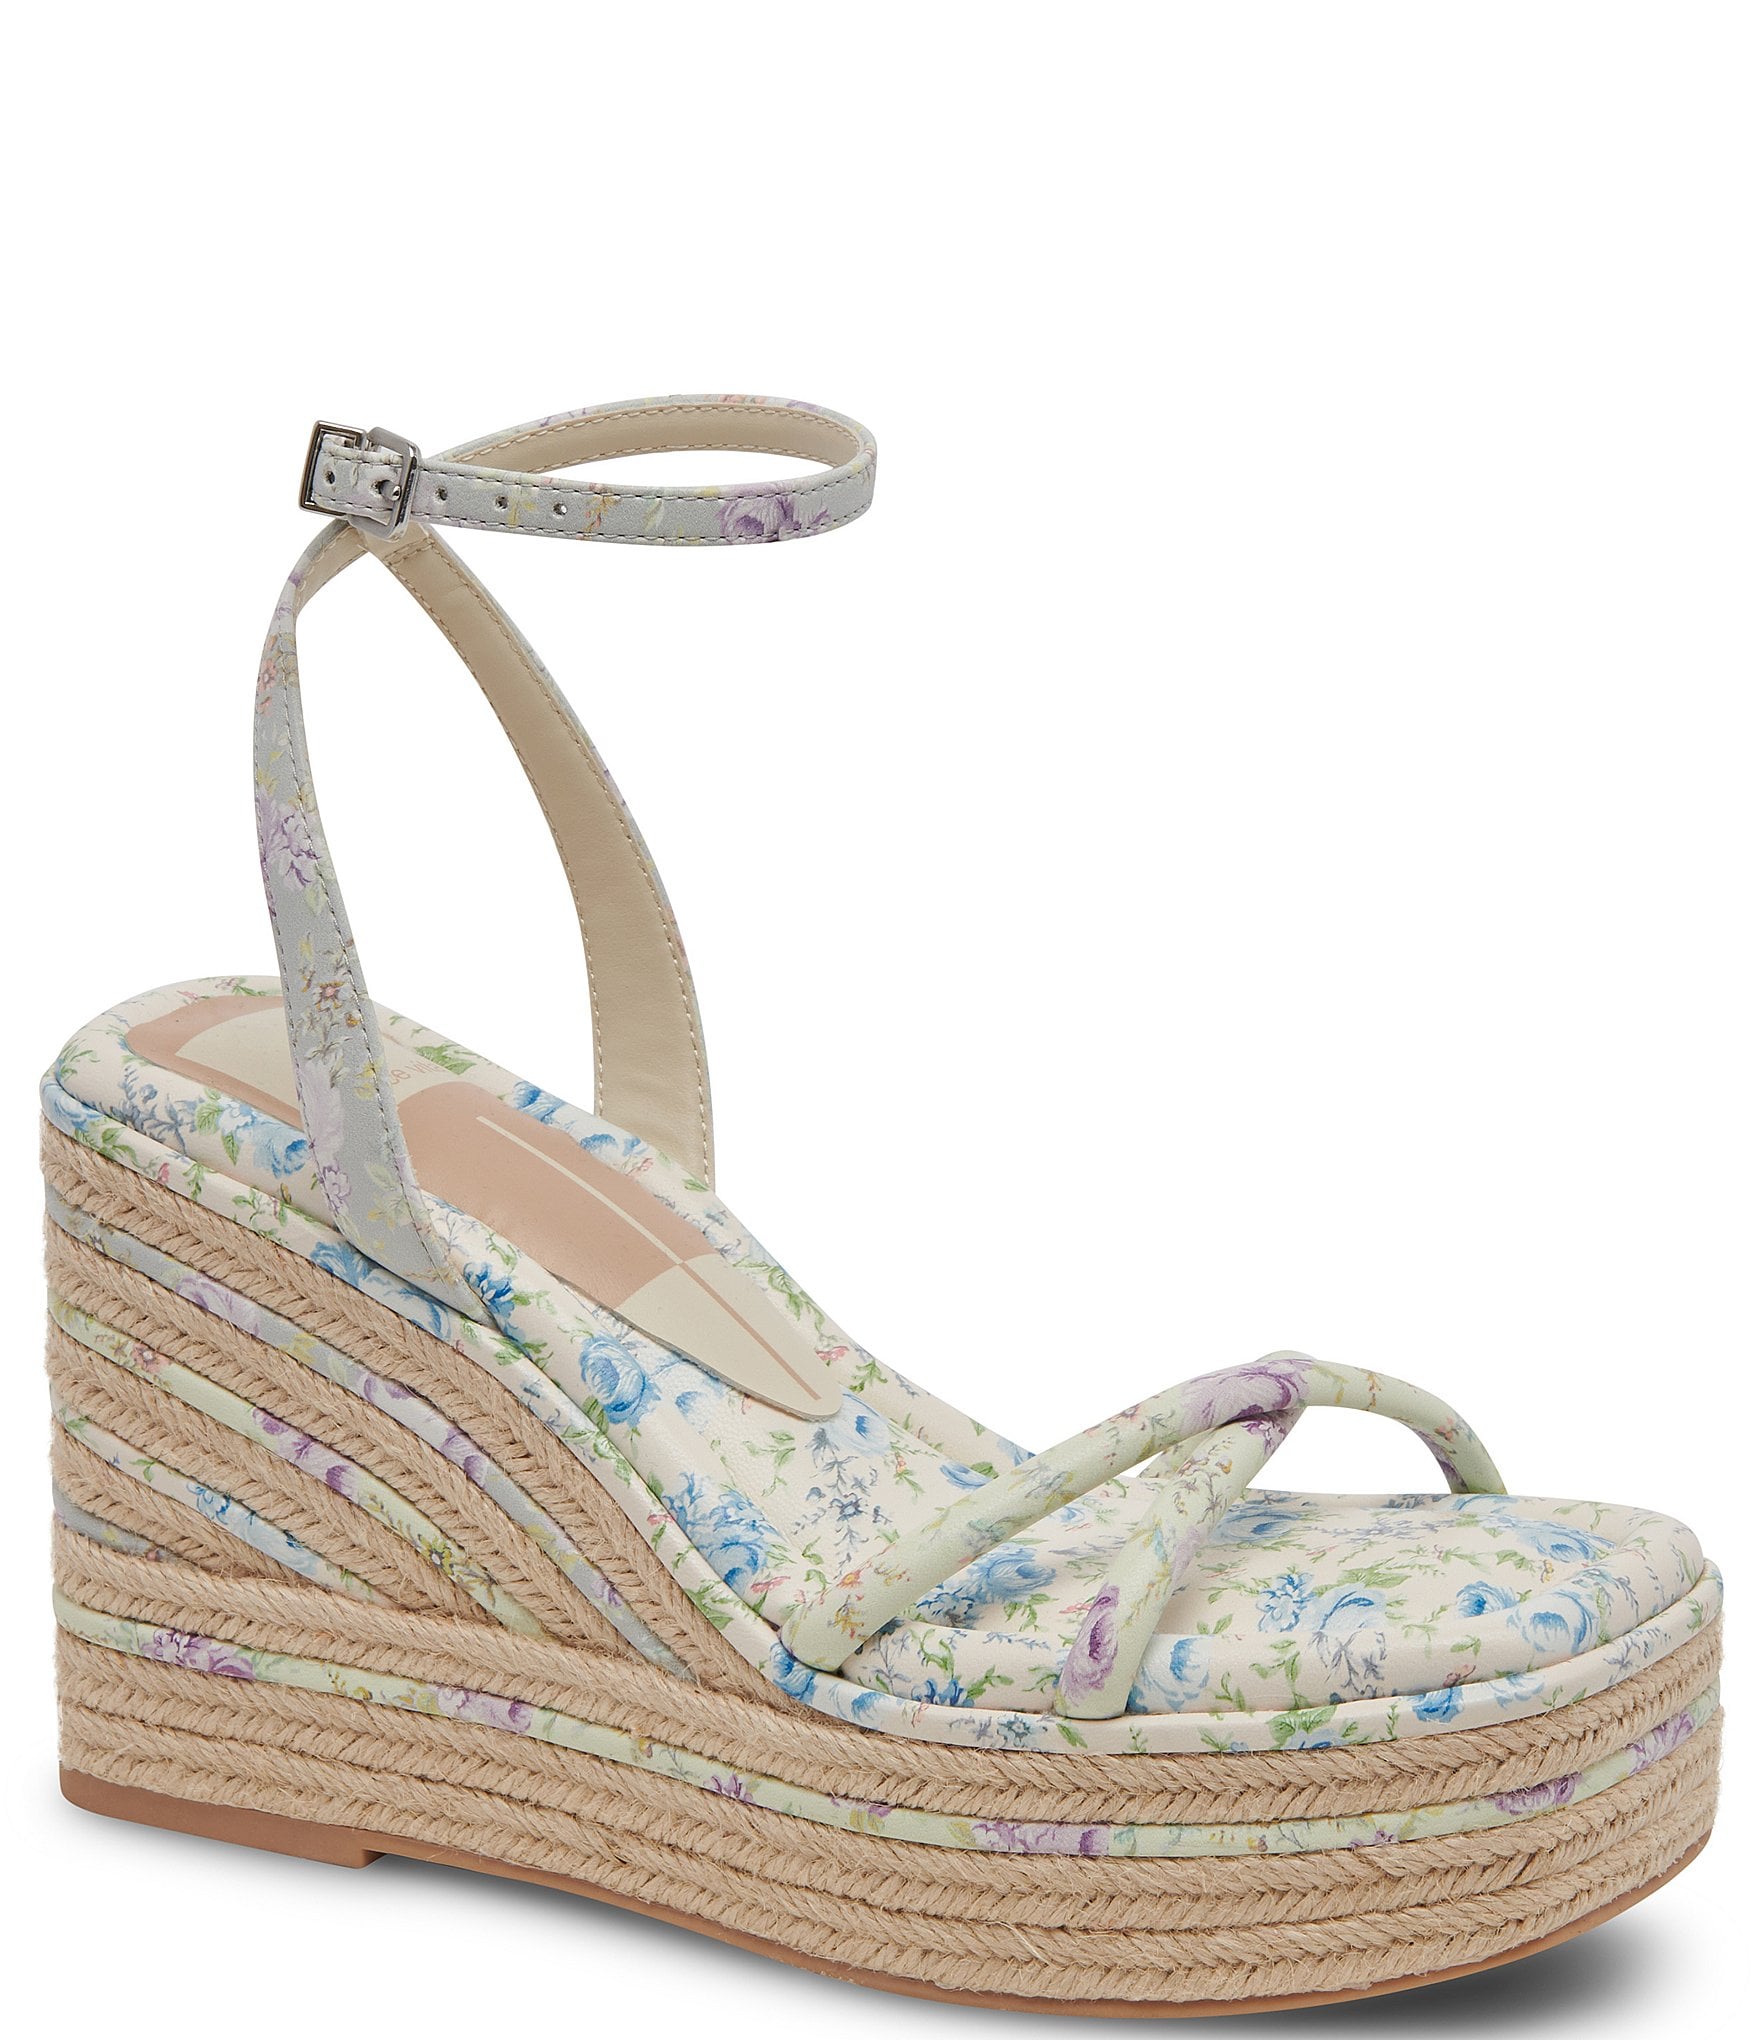 Twine Woven Floral Cross-Strap Wedges Sandals